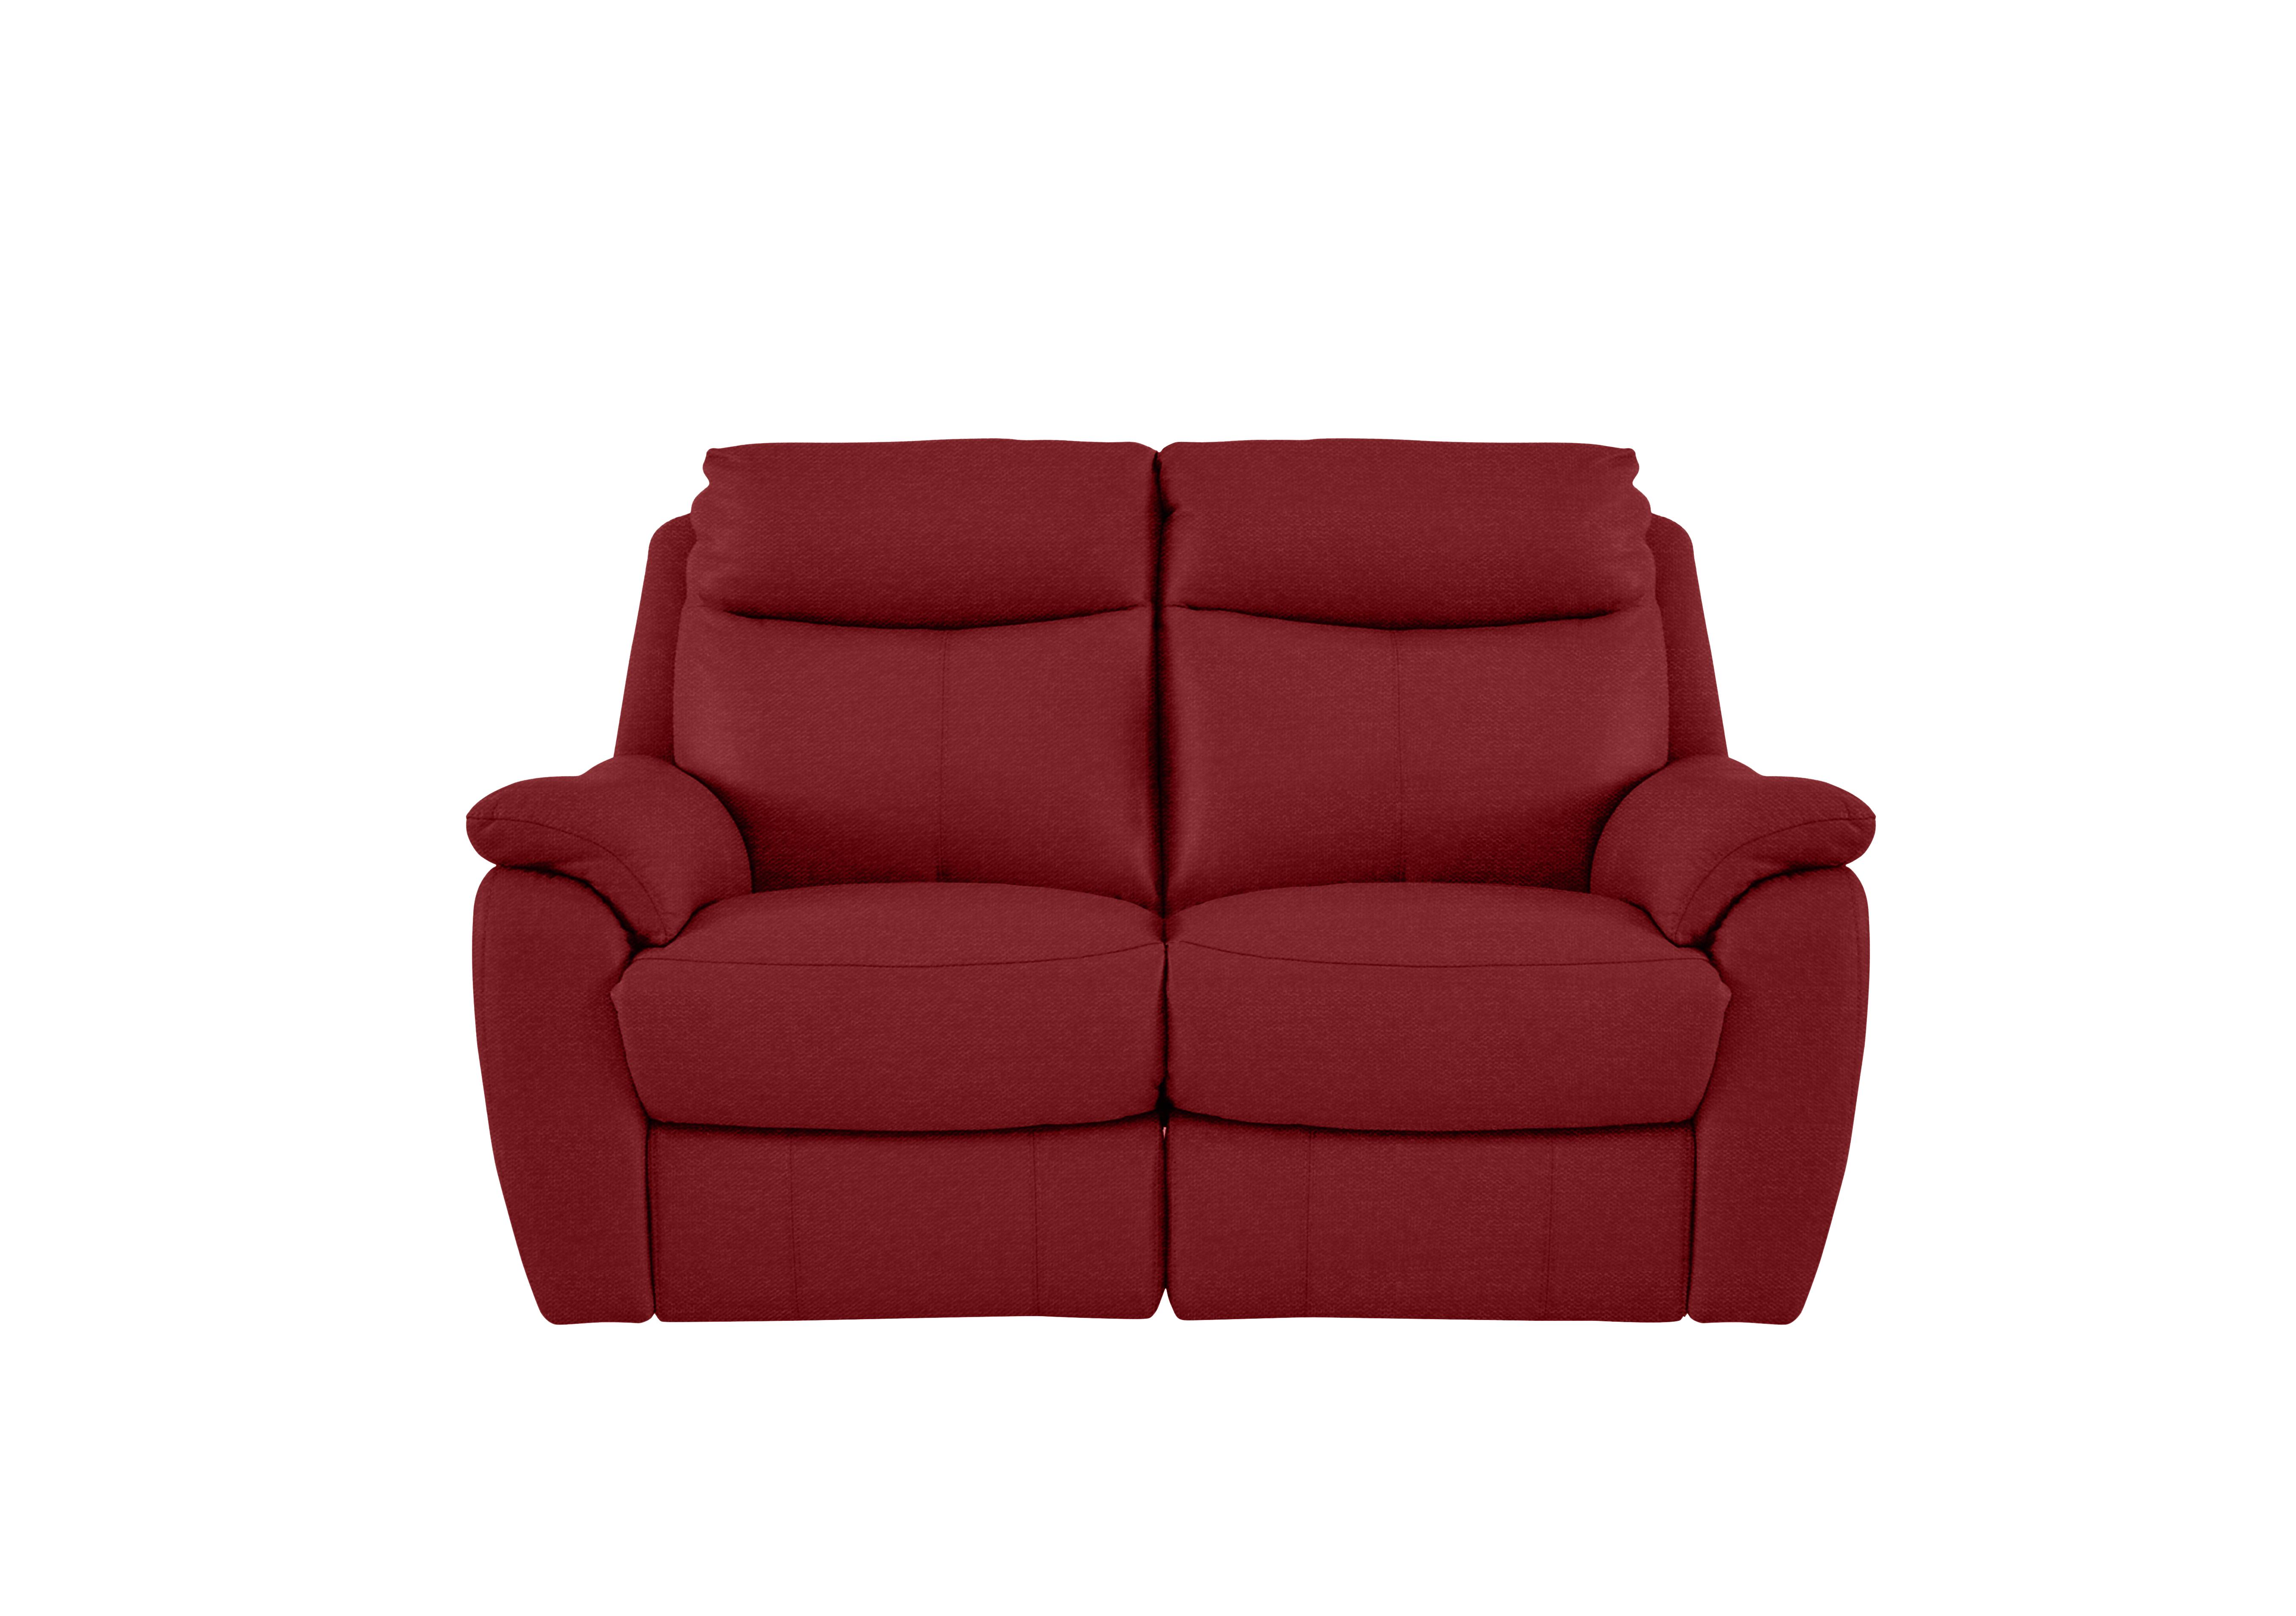 Snug 2 Seater Fabric Sofa in Fab-Blt-R29 Red on Furniture Village